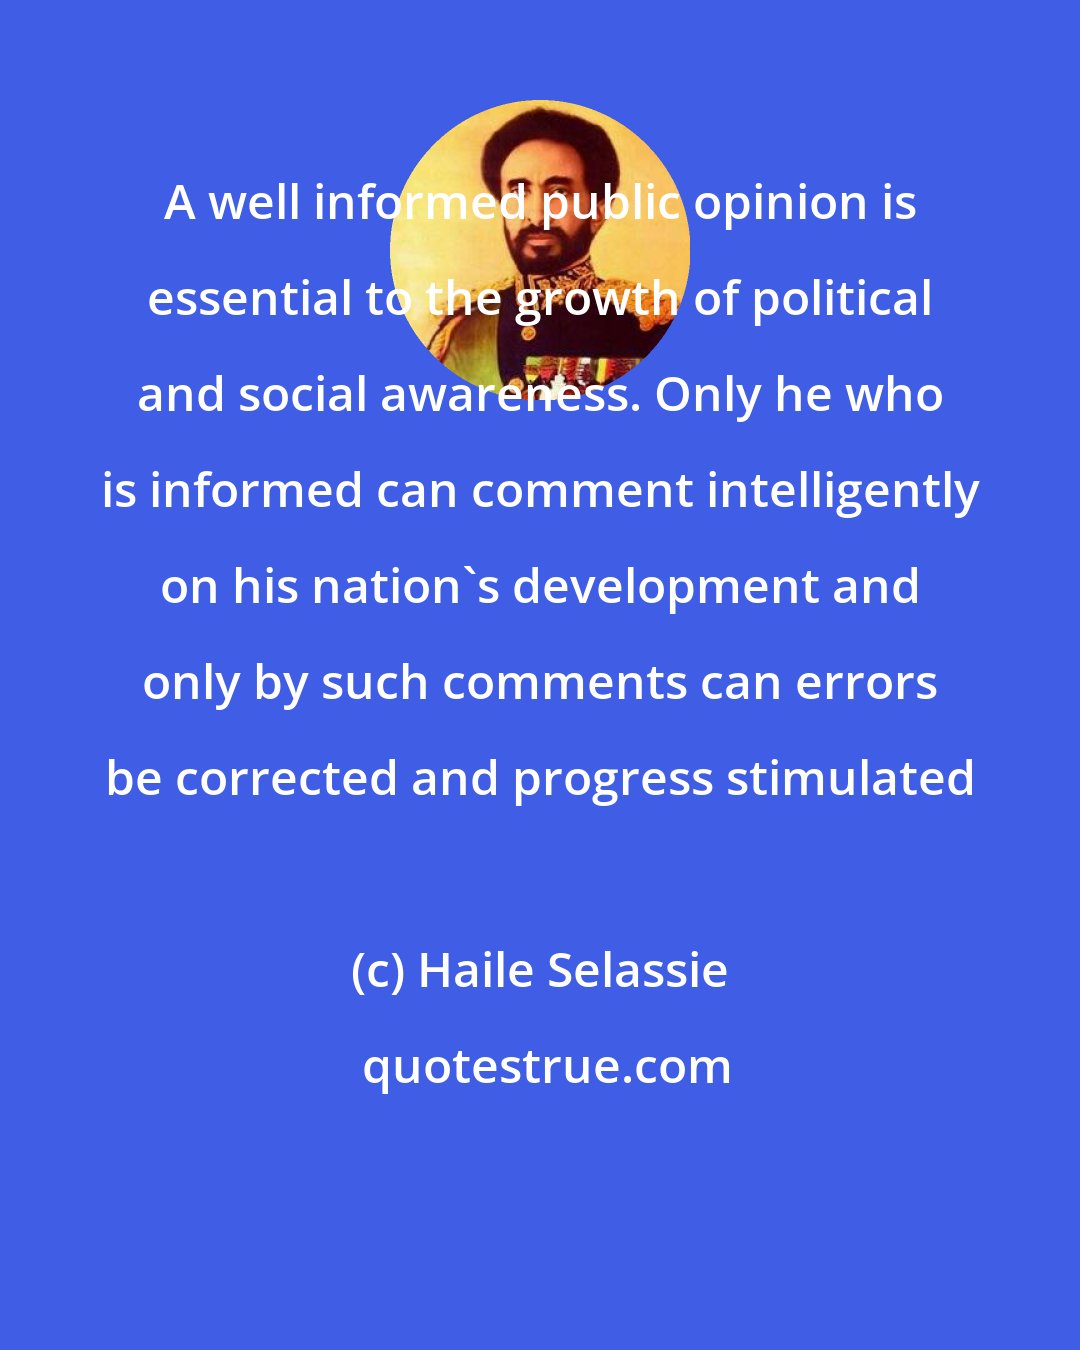 Haile Selassie: A well informed public opinion is essential to the growth of political and social awareness. Only he who is informed can comment intelligently on his nation's development and only by such comments can errors be corrected and progress stimulated